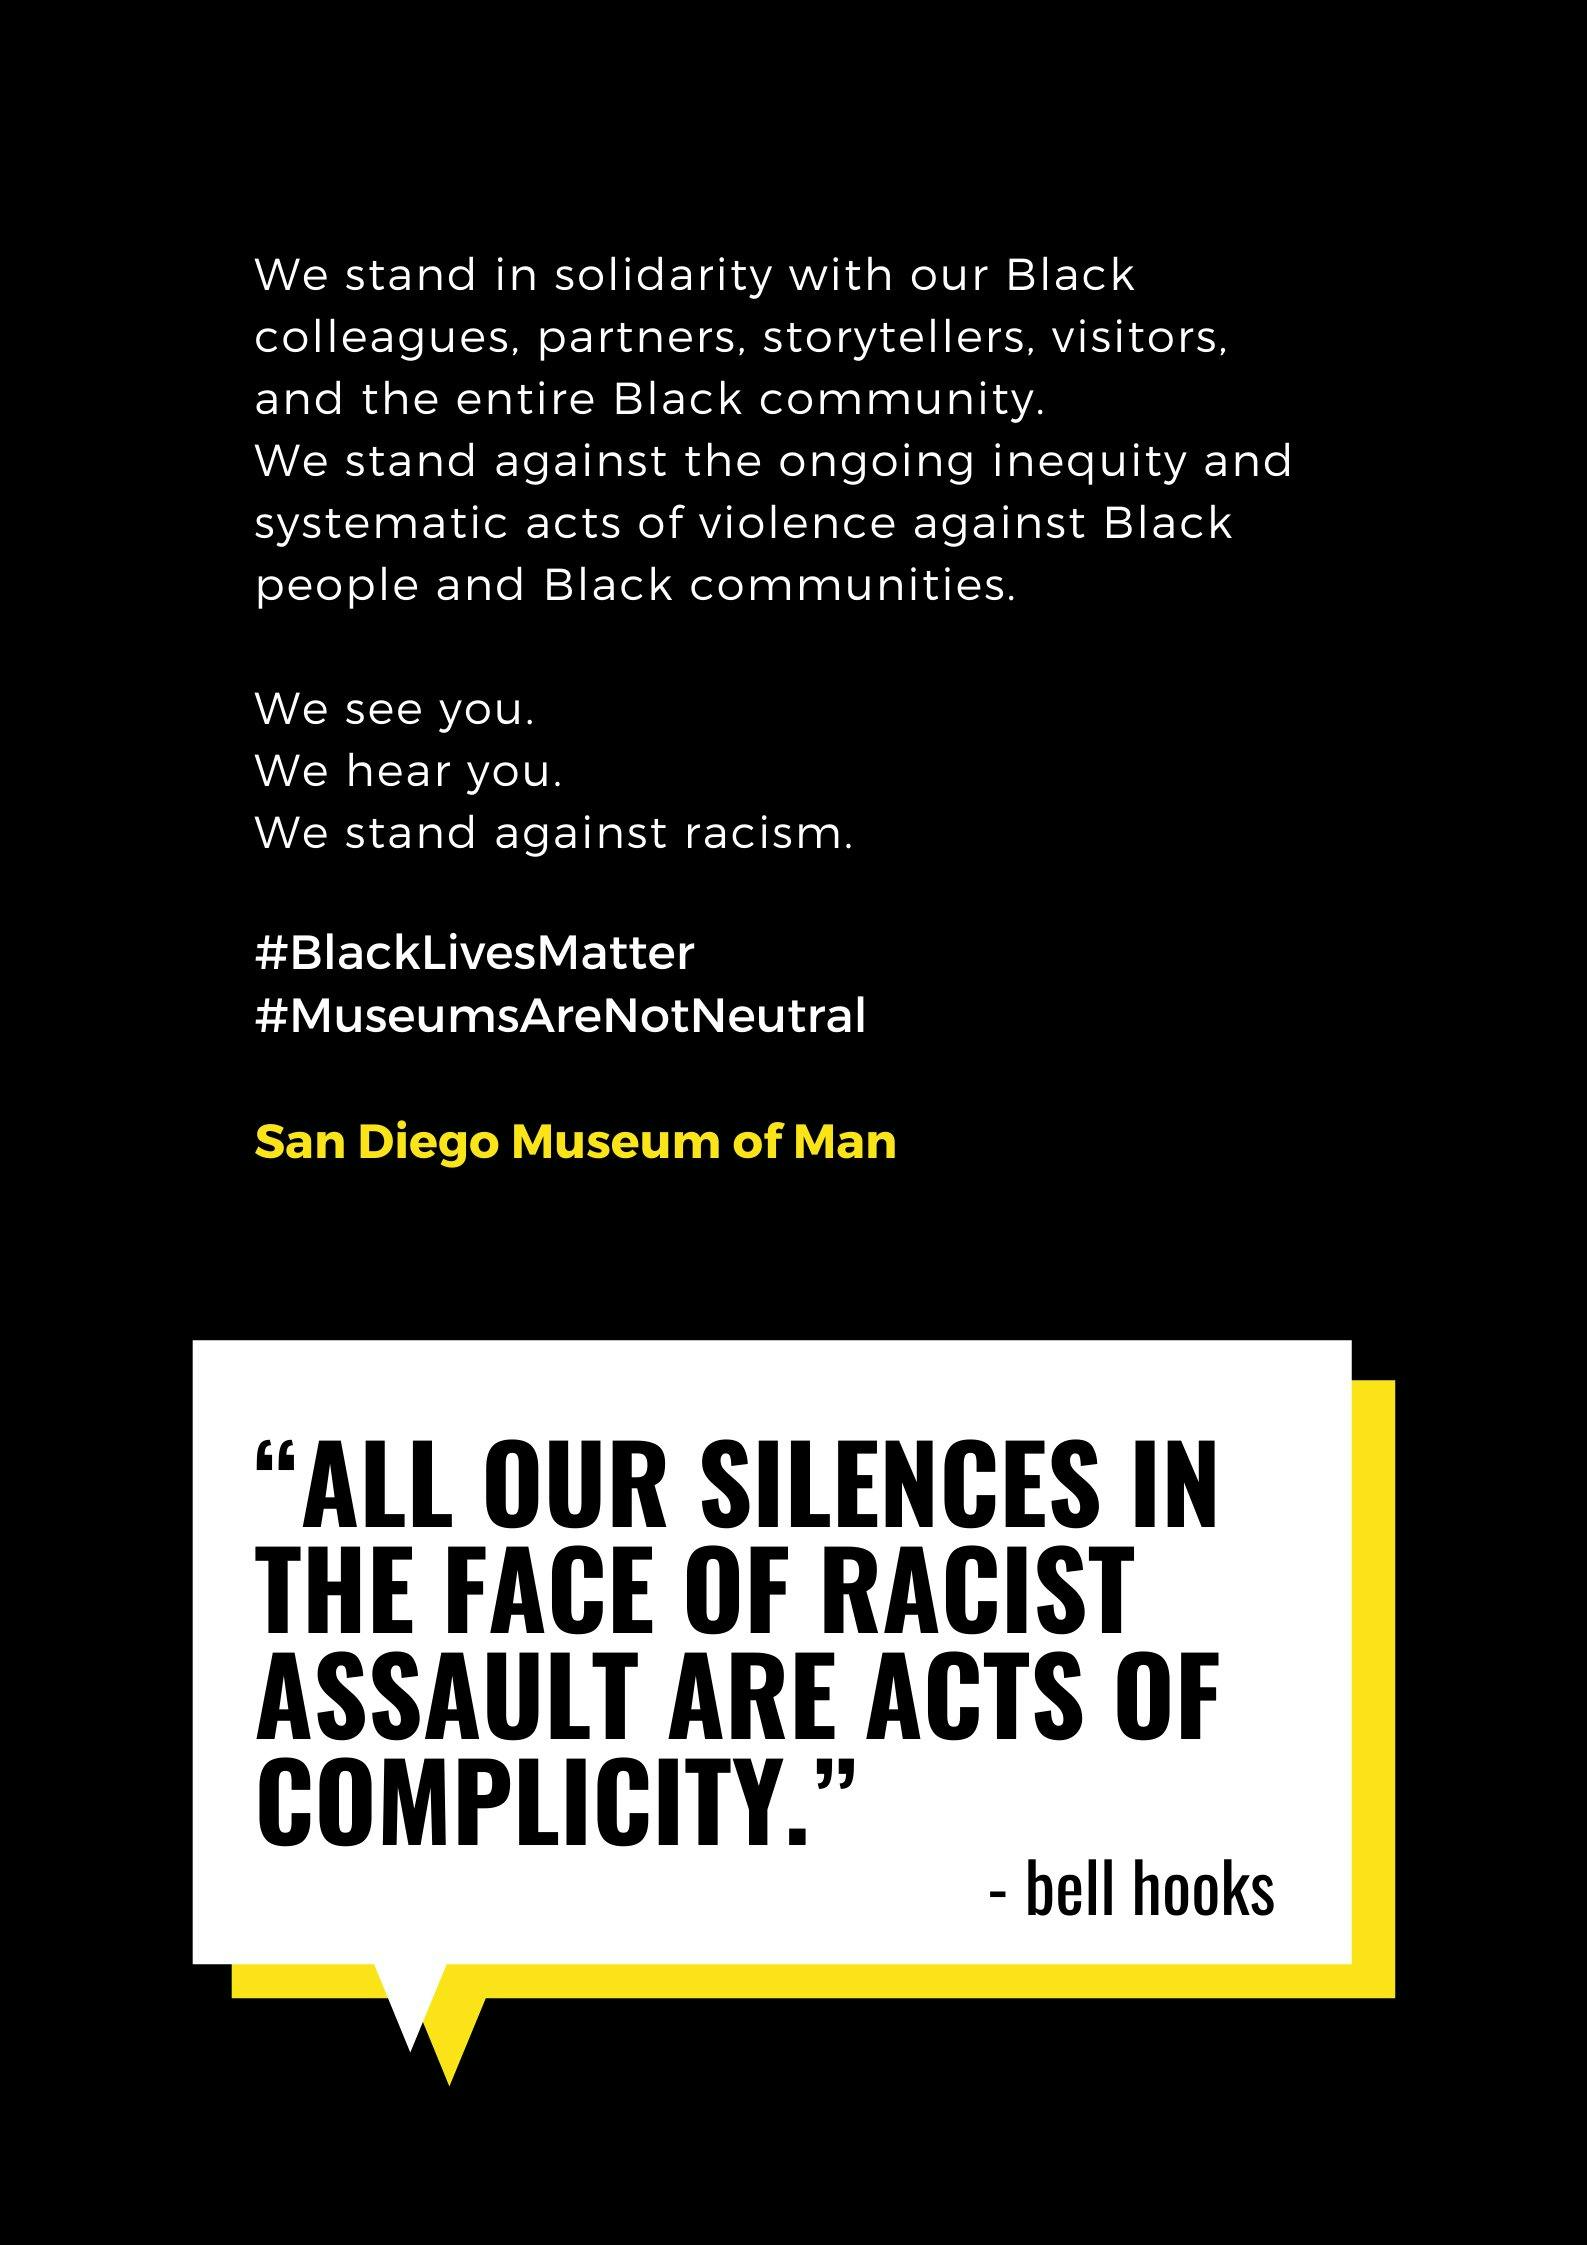 We stand in solidarity with our Black colleagues, partners, storytellers, visitors, and the entire Black community. We stand against the ongoing inequity and systematic acts of violence against Black people and Black communities. We see you. We hear you. We stand against racism. #BlackLivesMatter #MuseumsAreNotNeutral San Diego Museum of Man "All our silences in the face of racist assault are acts of complicity." - bell hooks